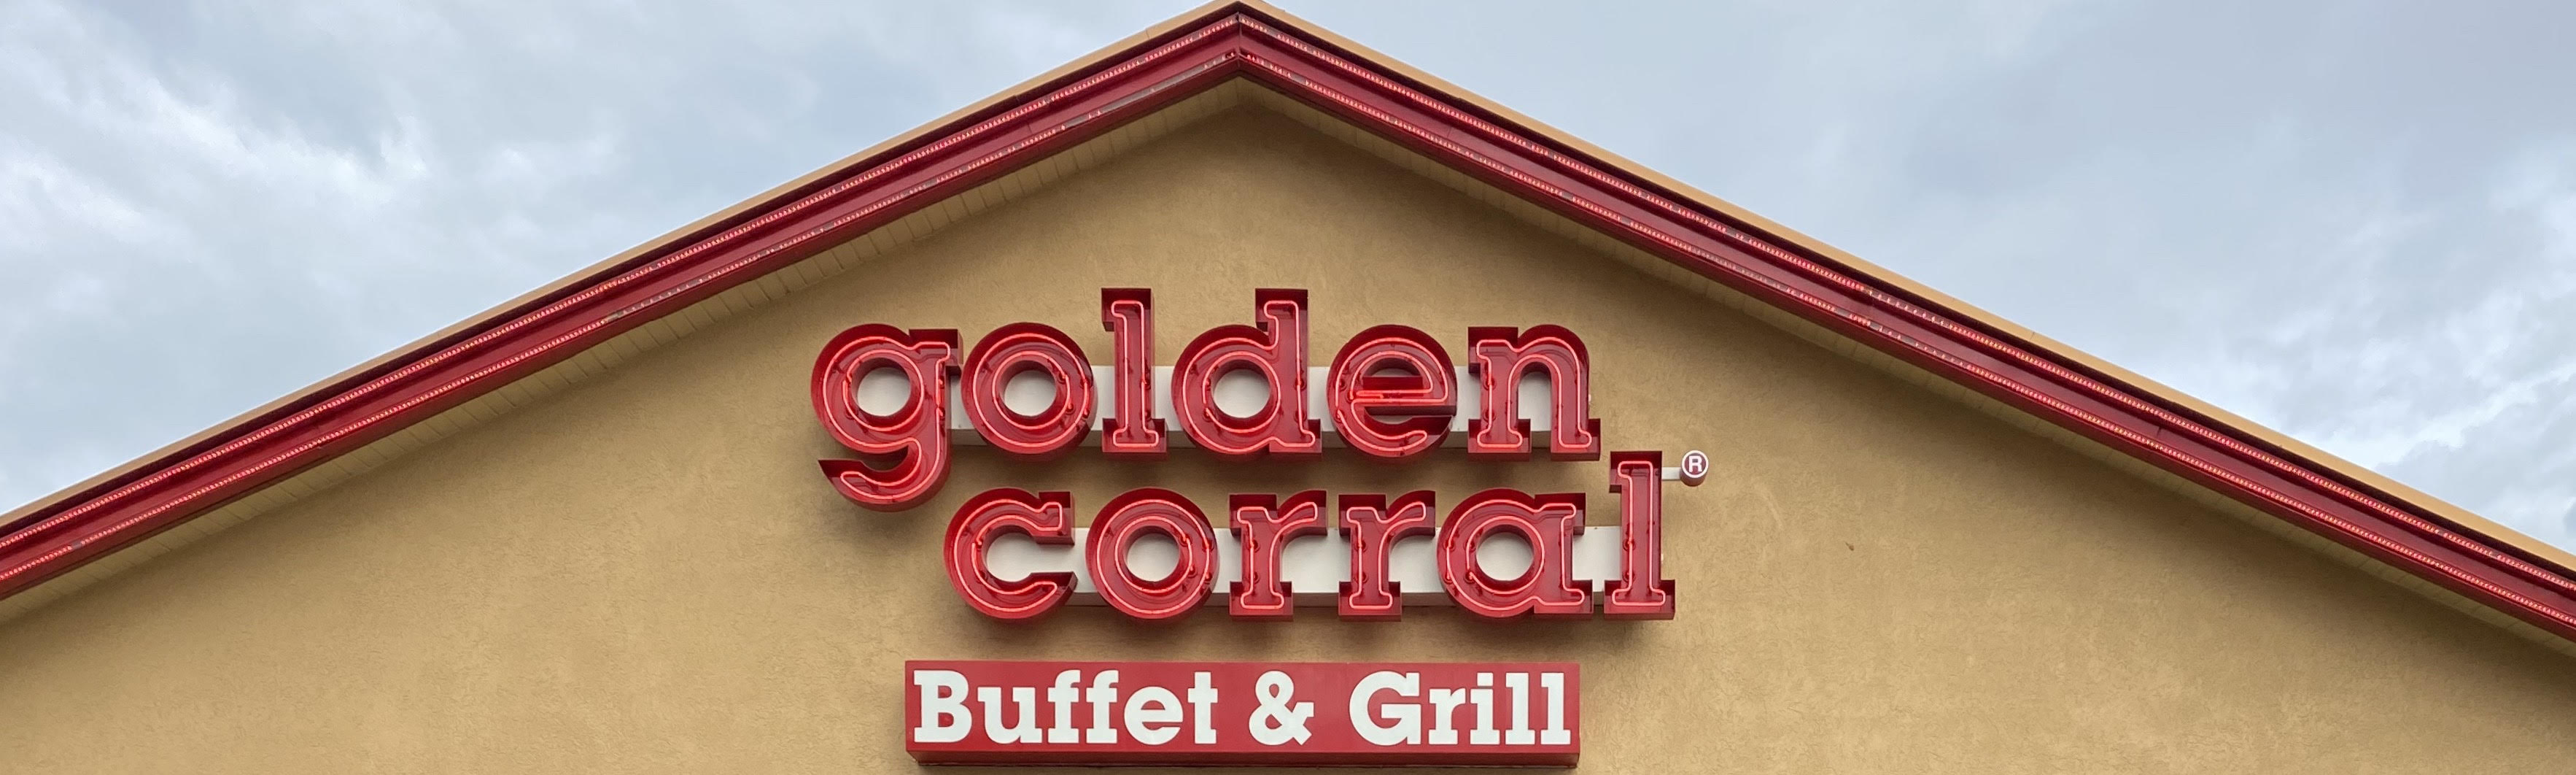 Golden Corral Prices - Dine-In Menu, Take Out Menu, Order Online, and more.